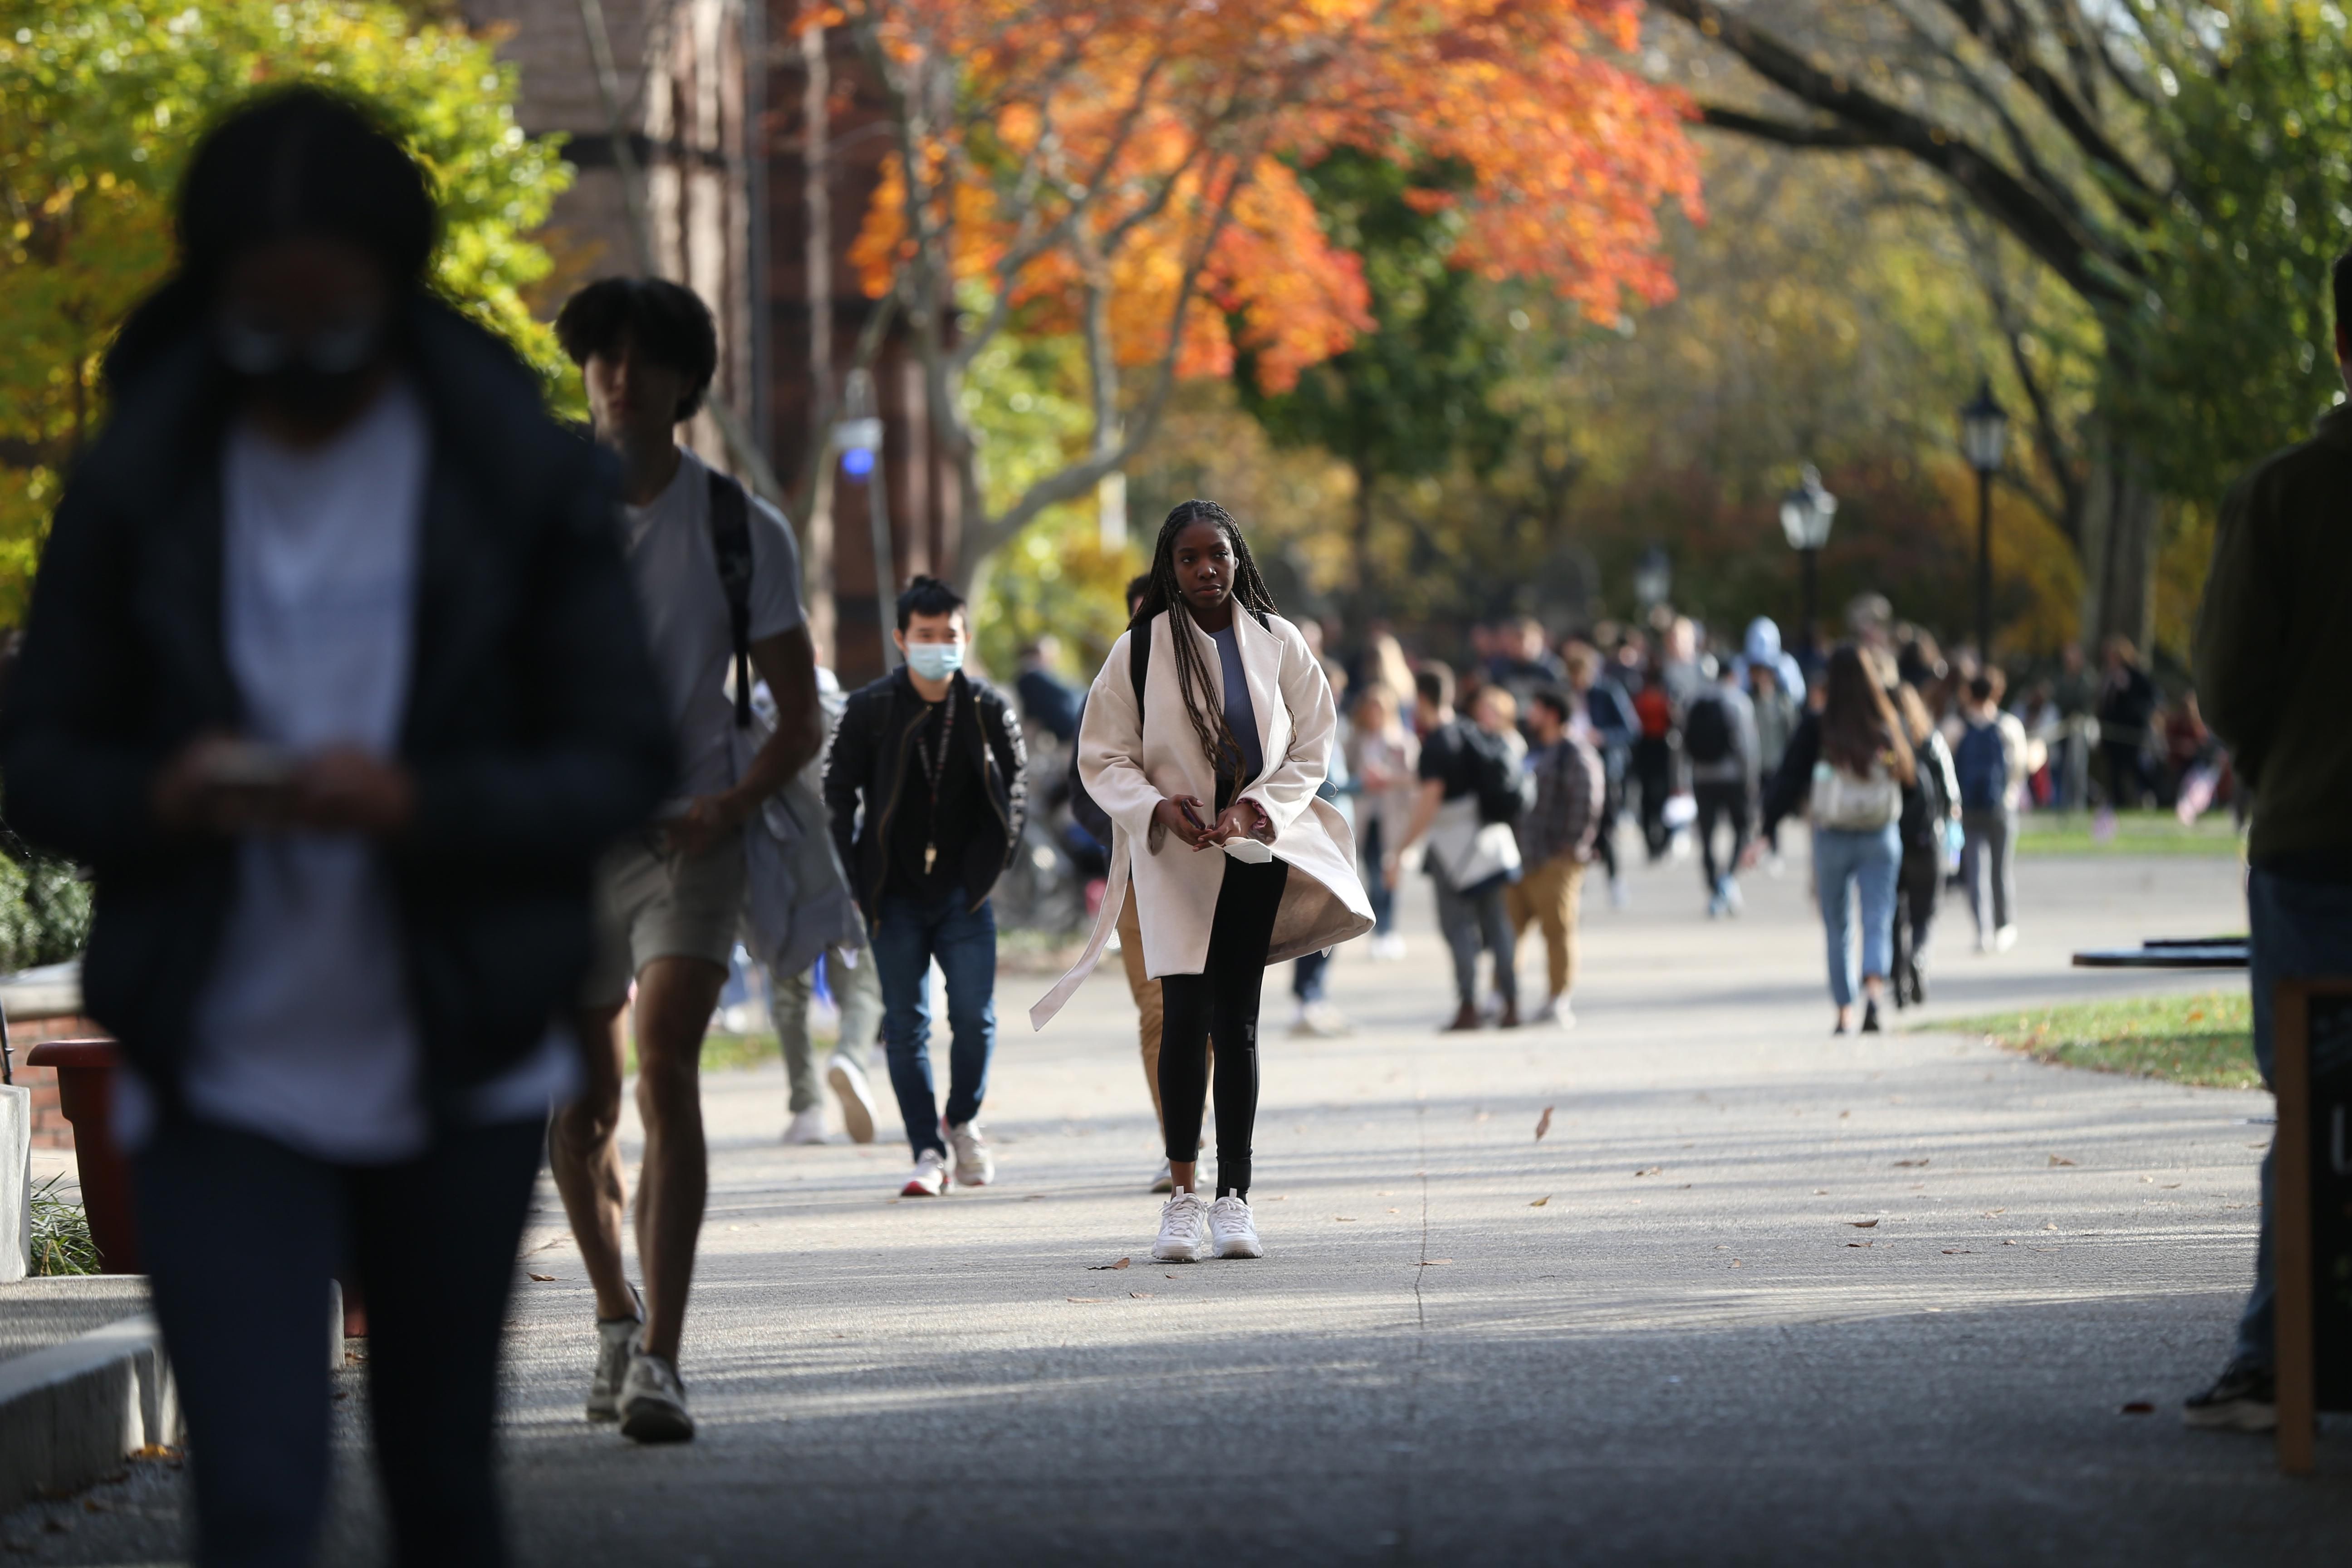 Students are seen walking on Brown University's campus in Providence, Rhode Island on November 11, 2021.